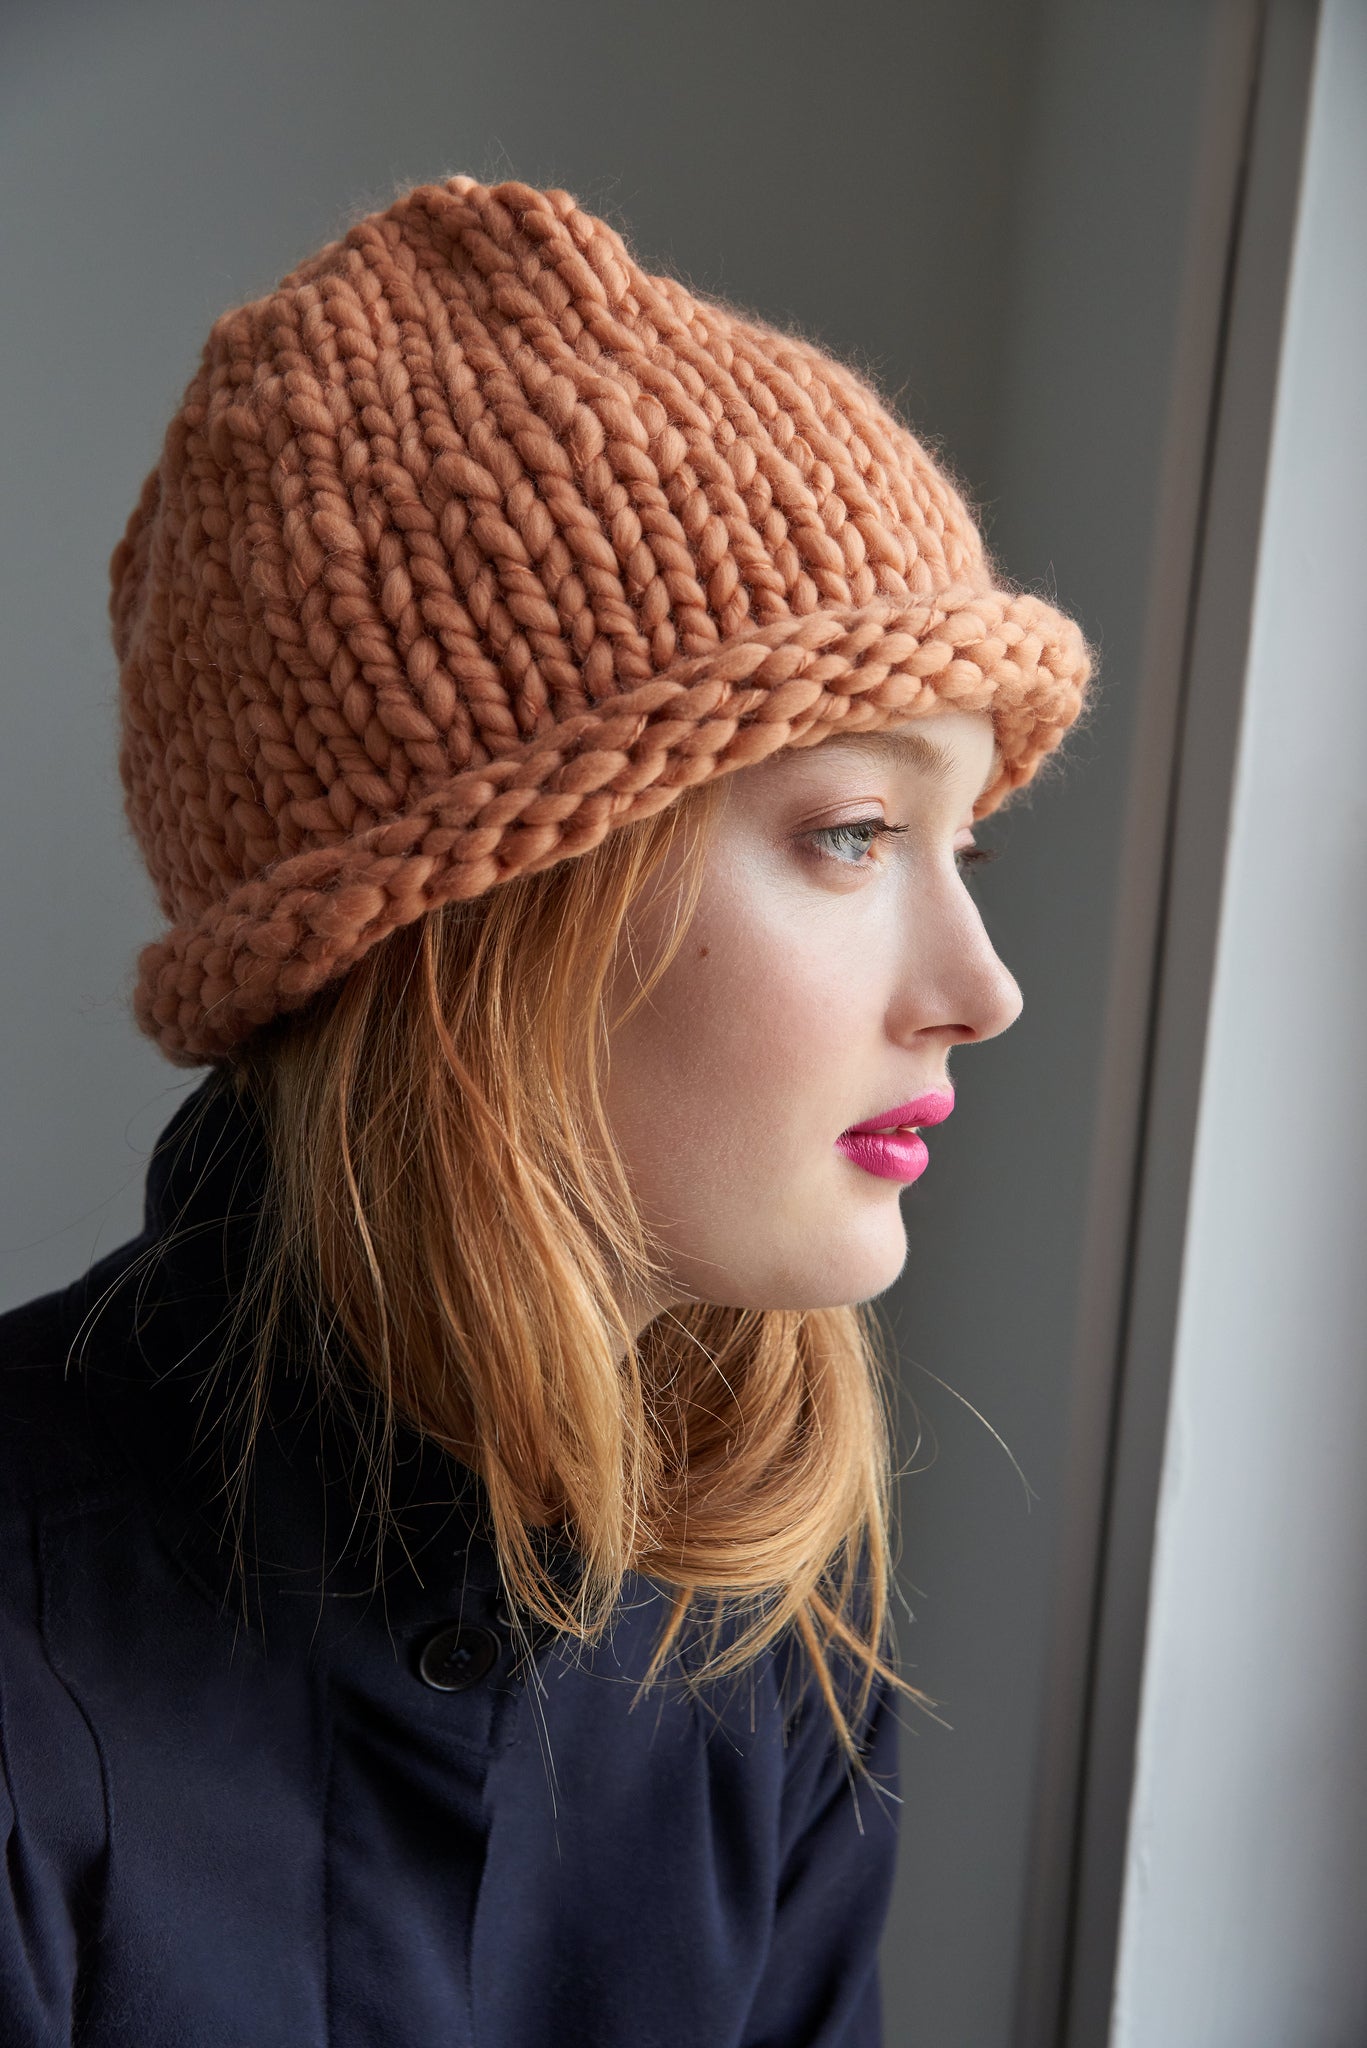 My First Hat AND My First Scarf PATTERNS - Merino No. 5